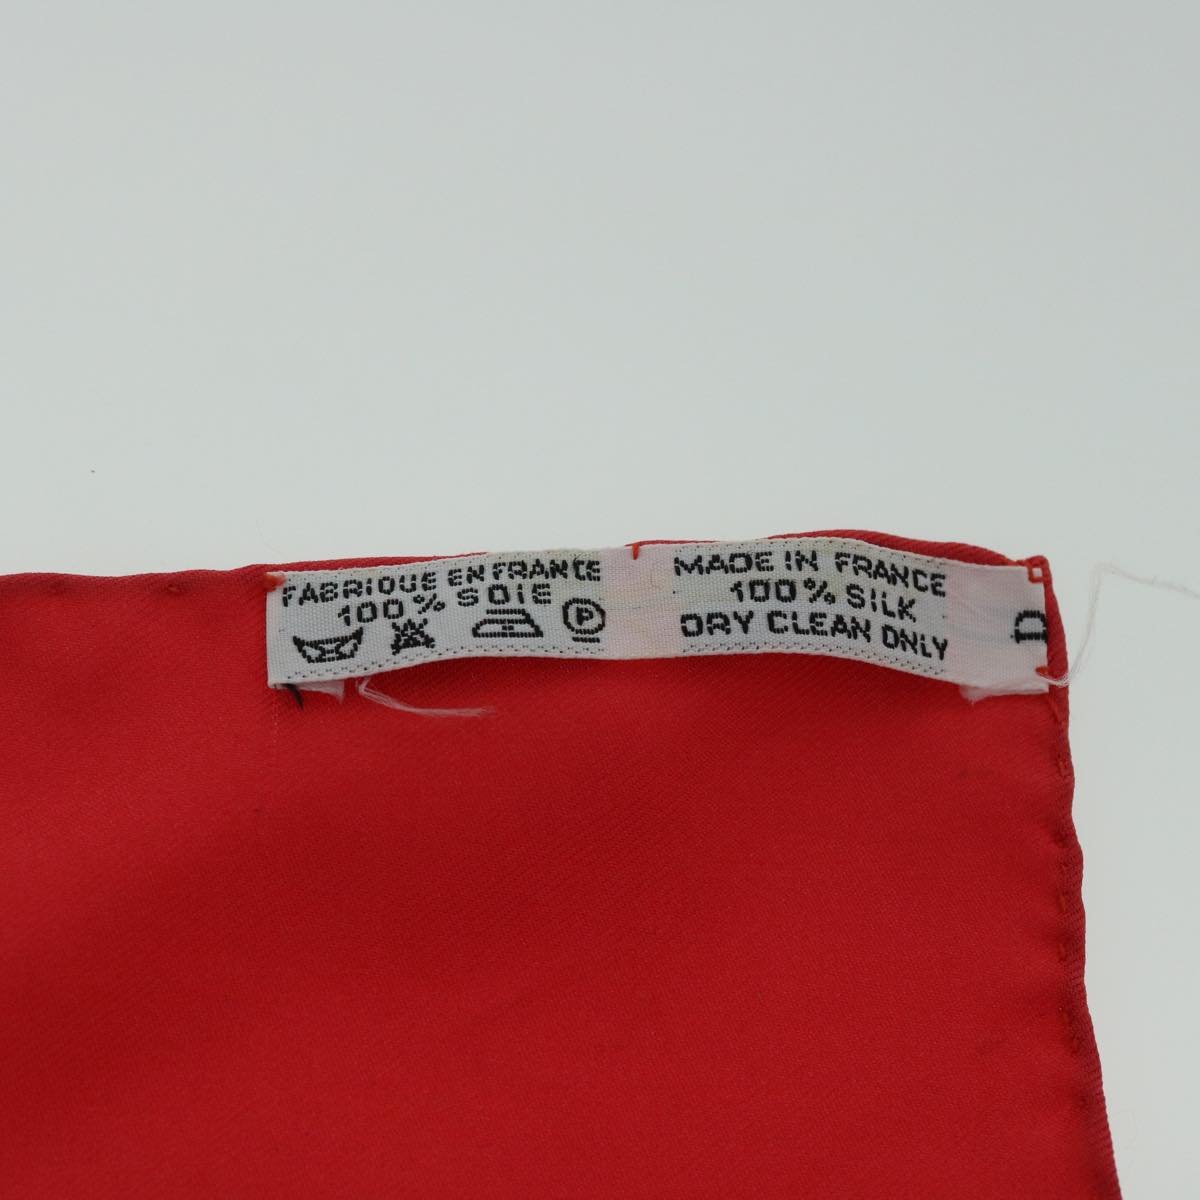 HERMES Carre 90 NIKKO Scarf Silk Red Auth am4977